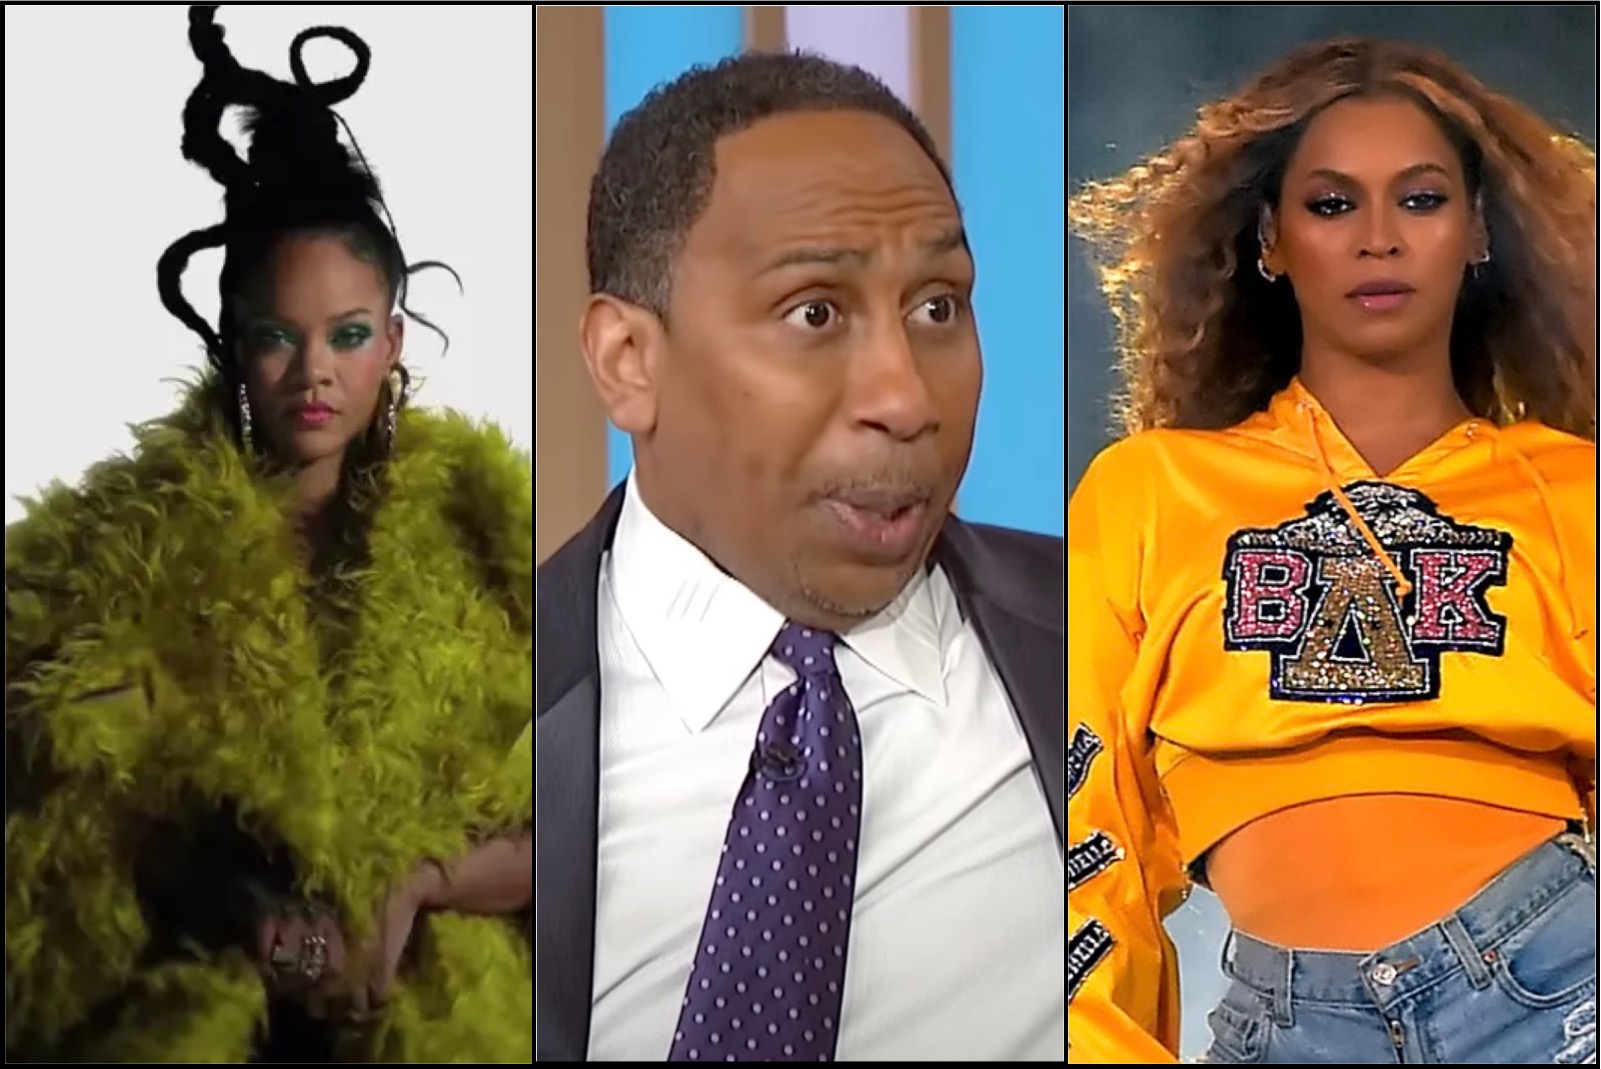 Stephen A. Smith Apologizes to Rihanna After Saying She is No Beyonce